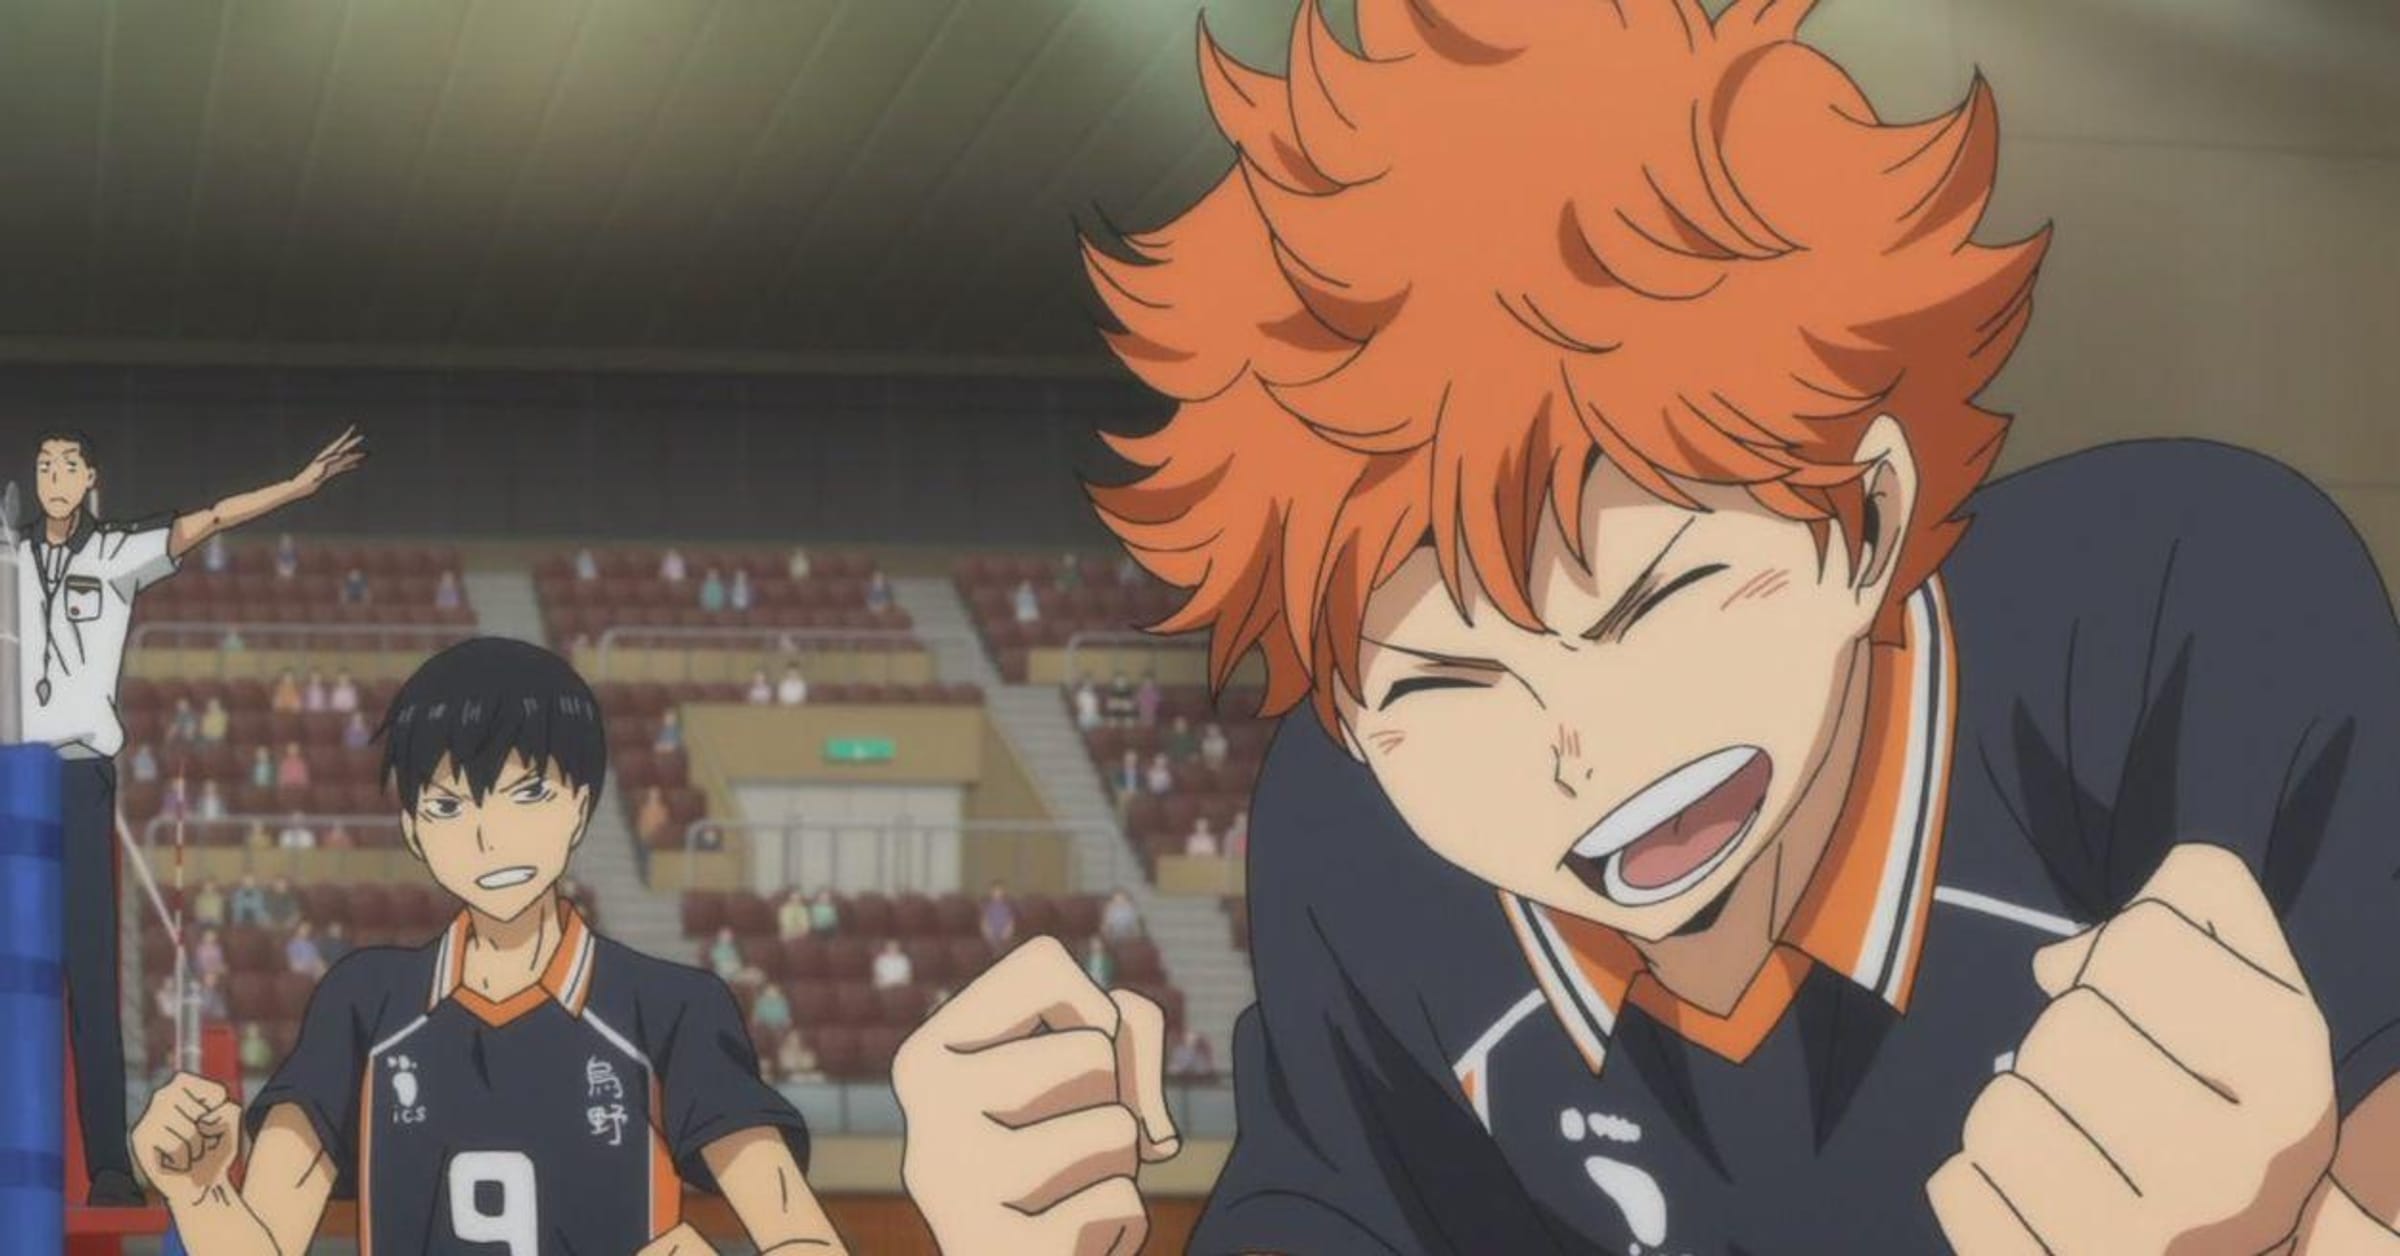 Which Haikyuu Character Are You Based On Your Zodiac Sign?